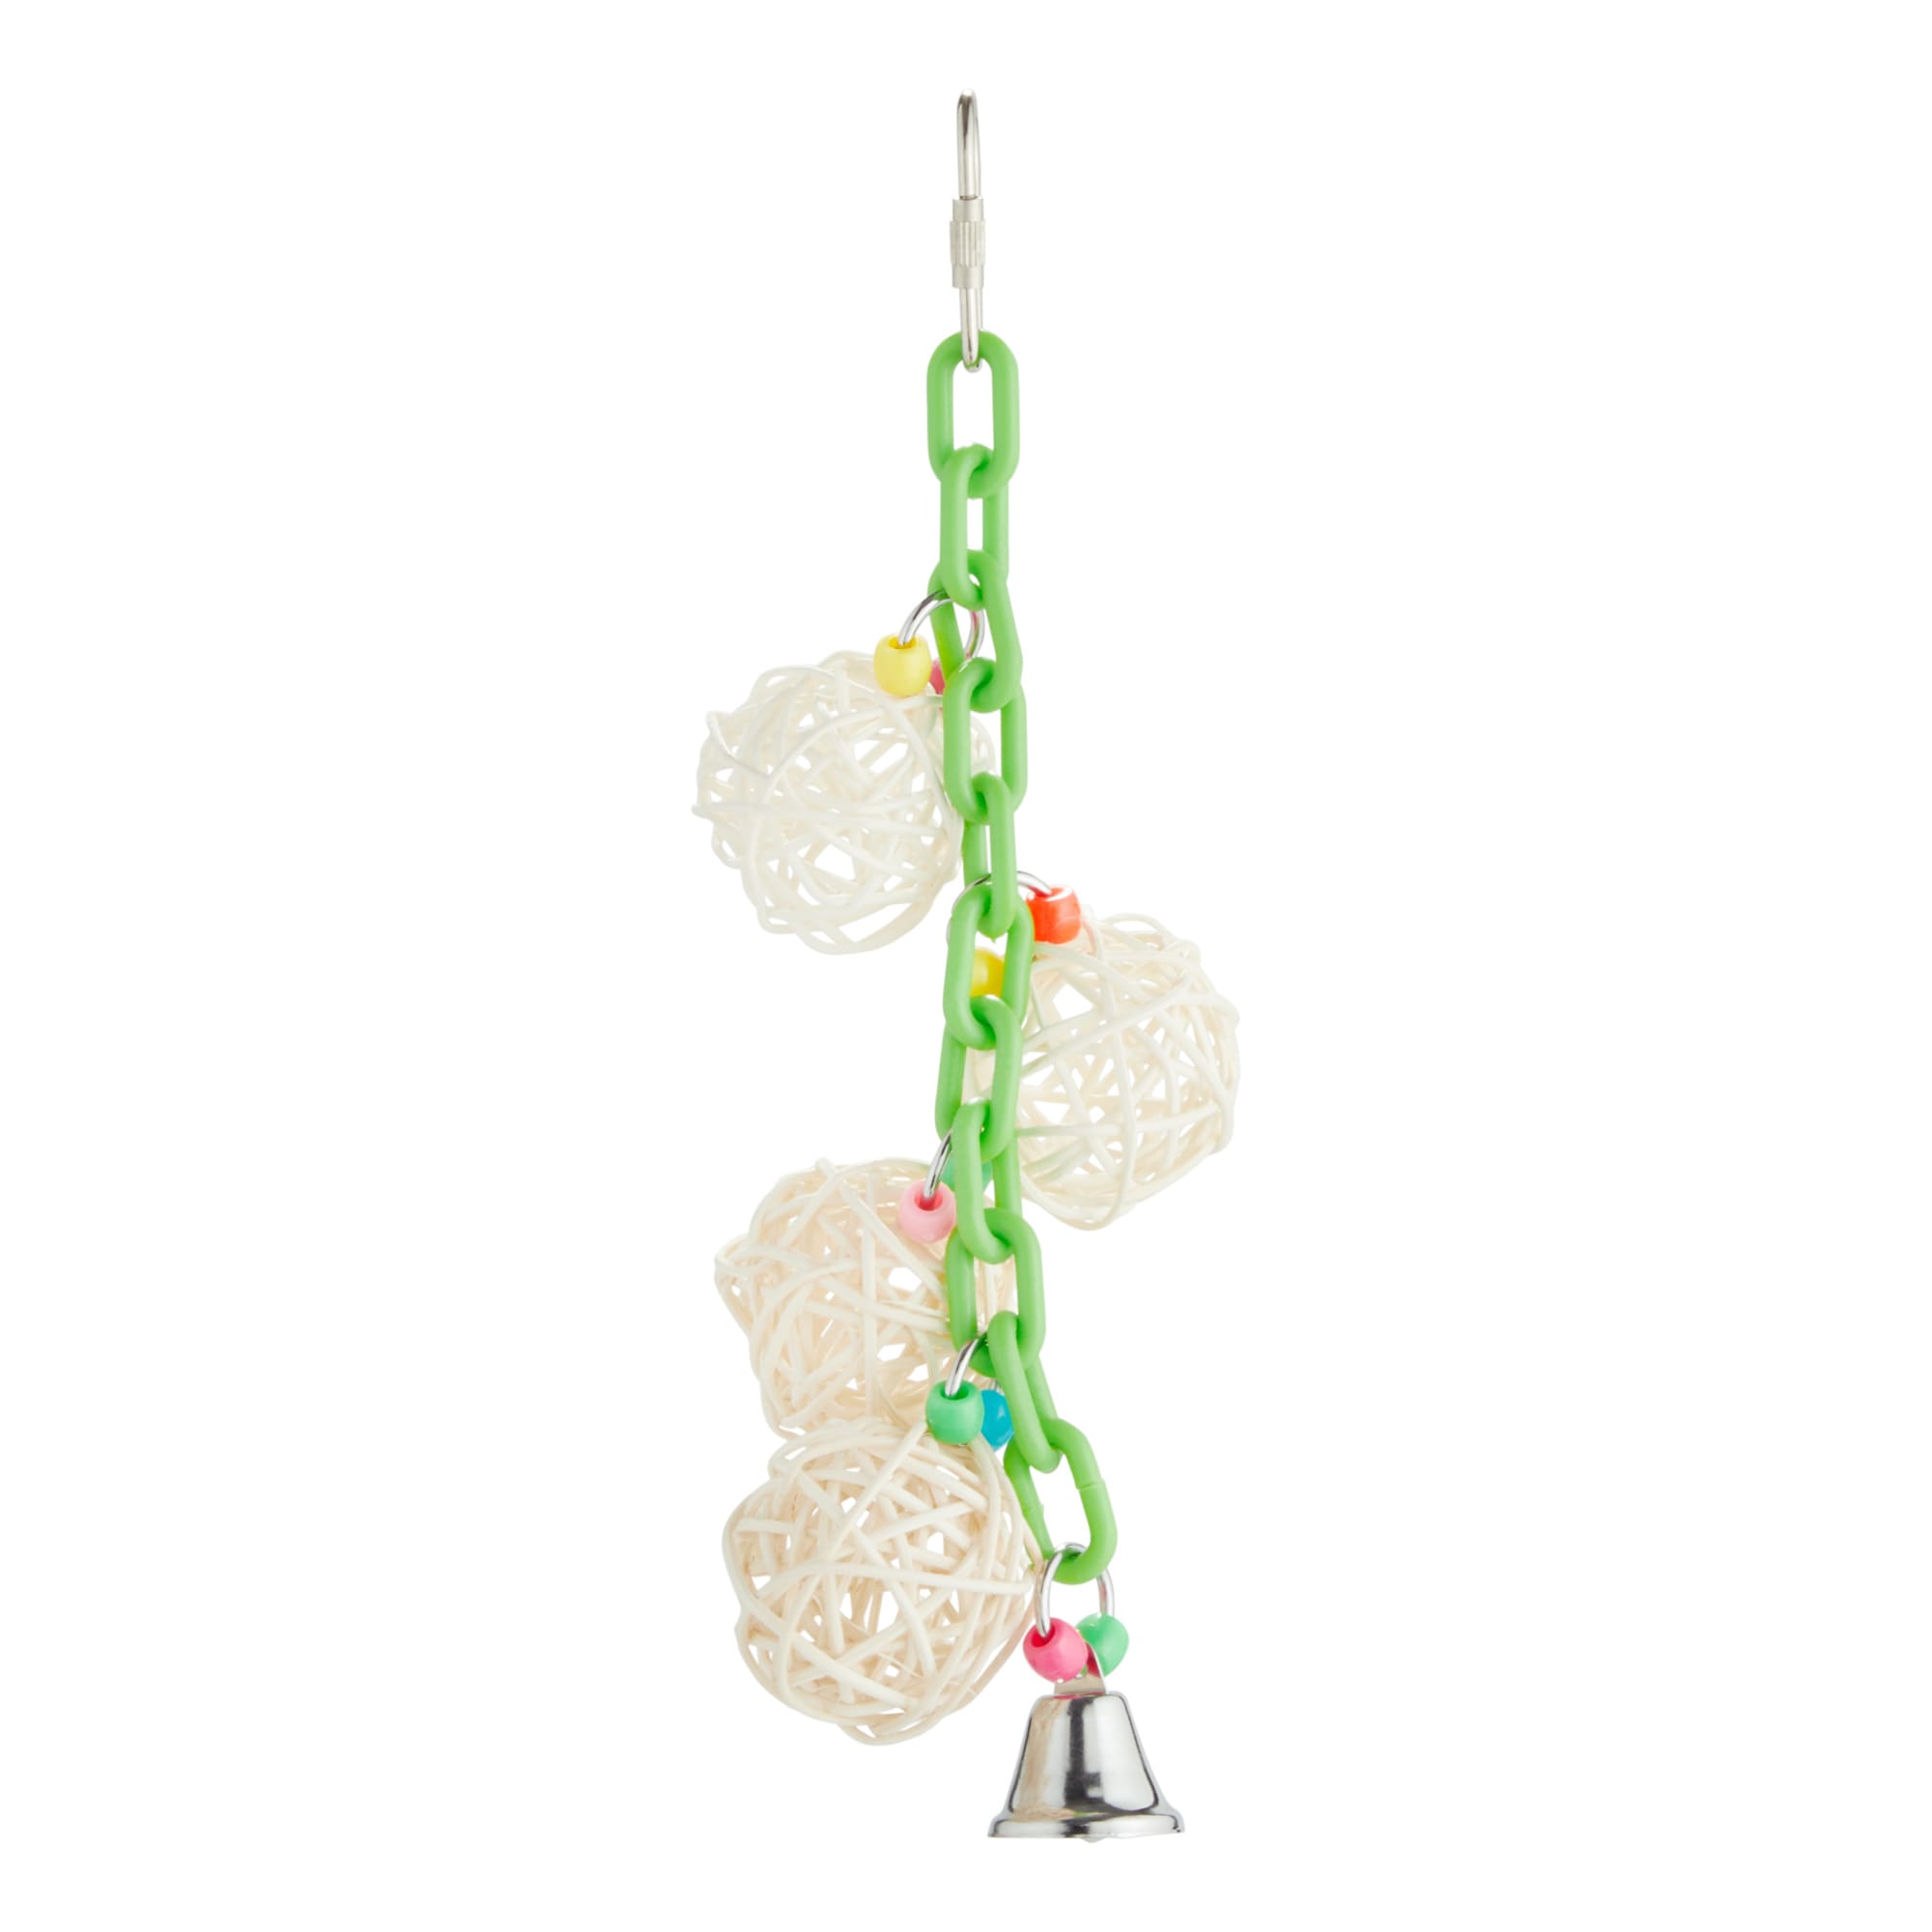 PENN PLAX 6" LATTICE BALLS WITH BELL SMALL BIRD TOY FREE SHIPPING IN THE USA 